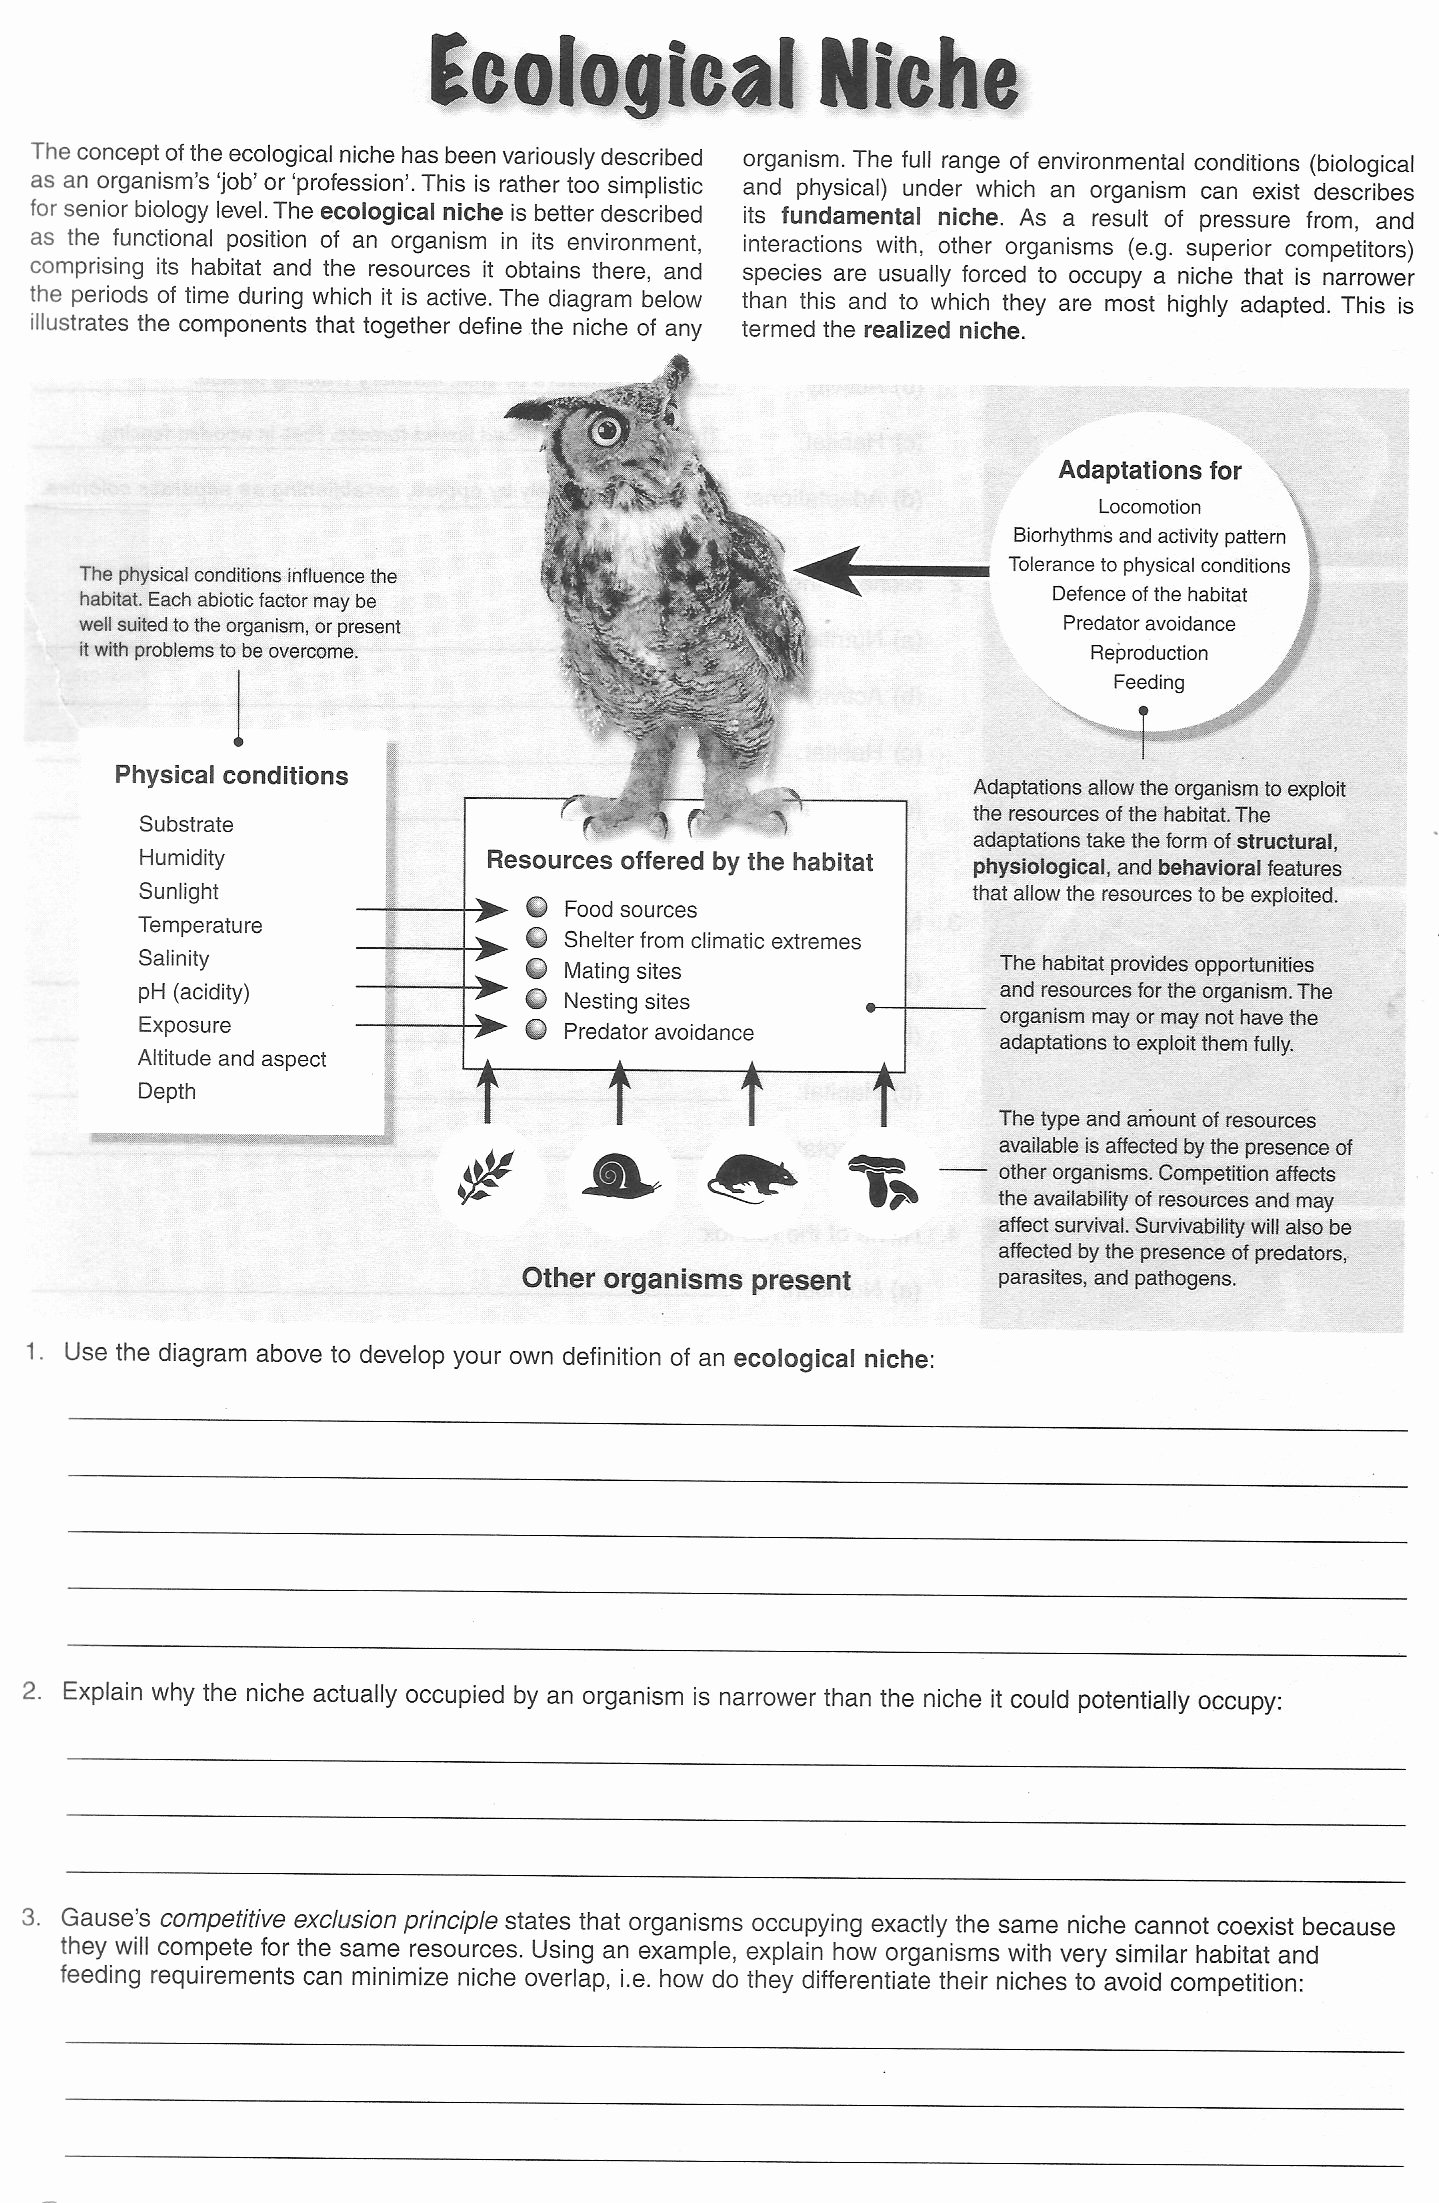 Ecological Succession Worksheet Answers Beautiful Habitat and Niche Worksheet